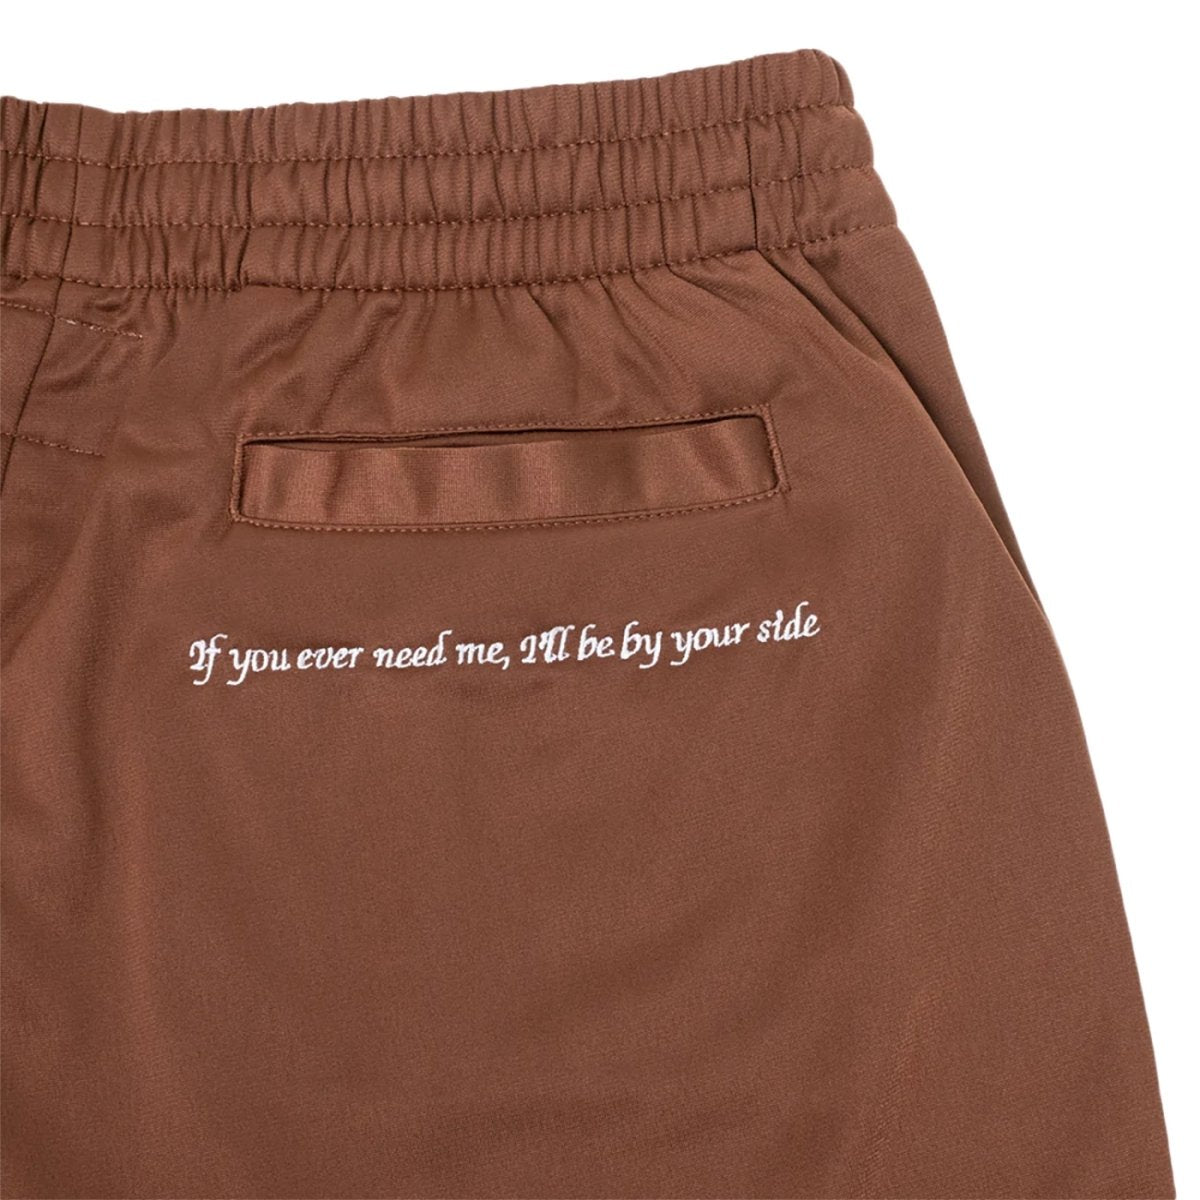 Felt Track Pant Stardust Brown - 10020399 - West NYC